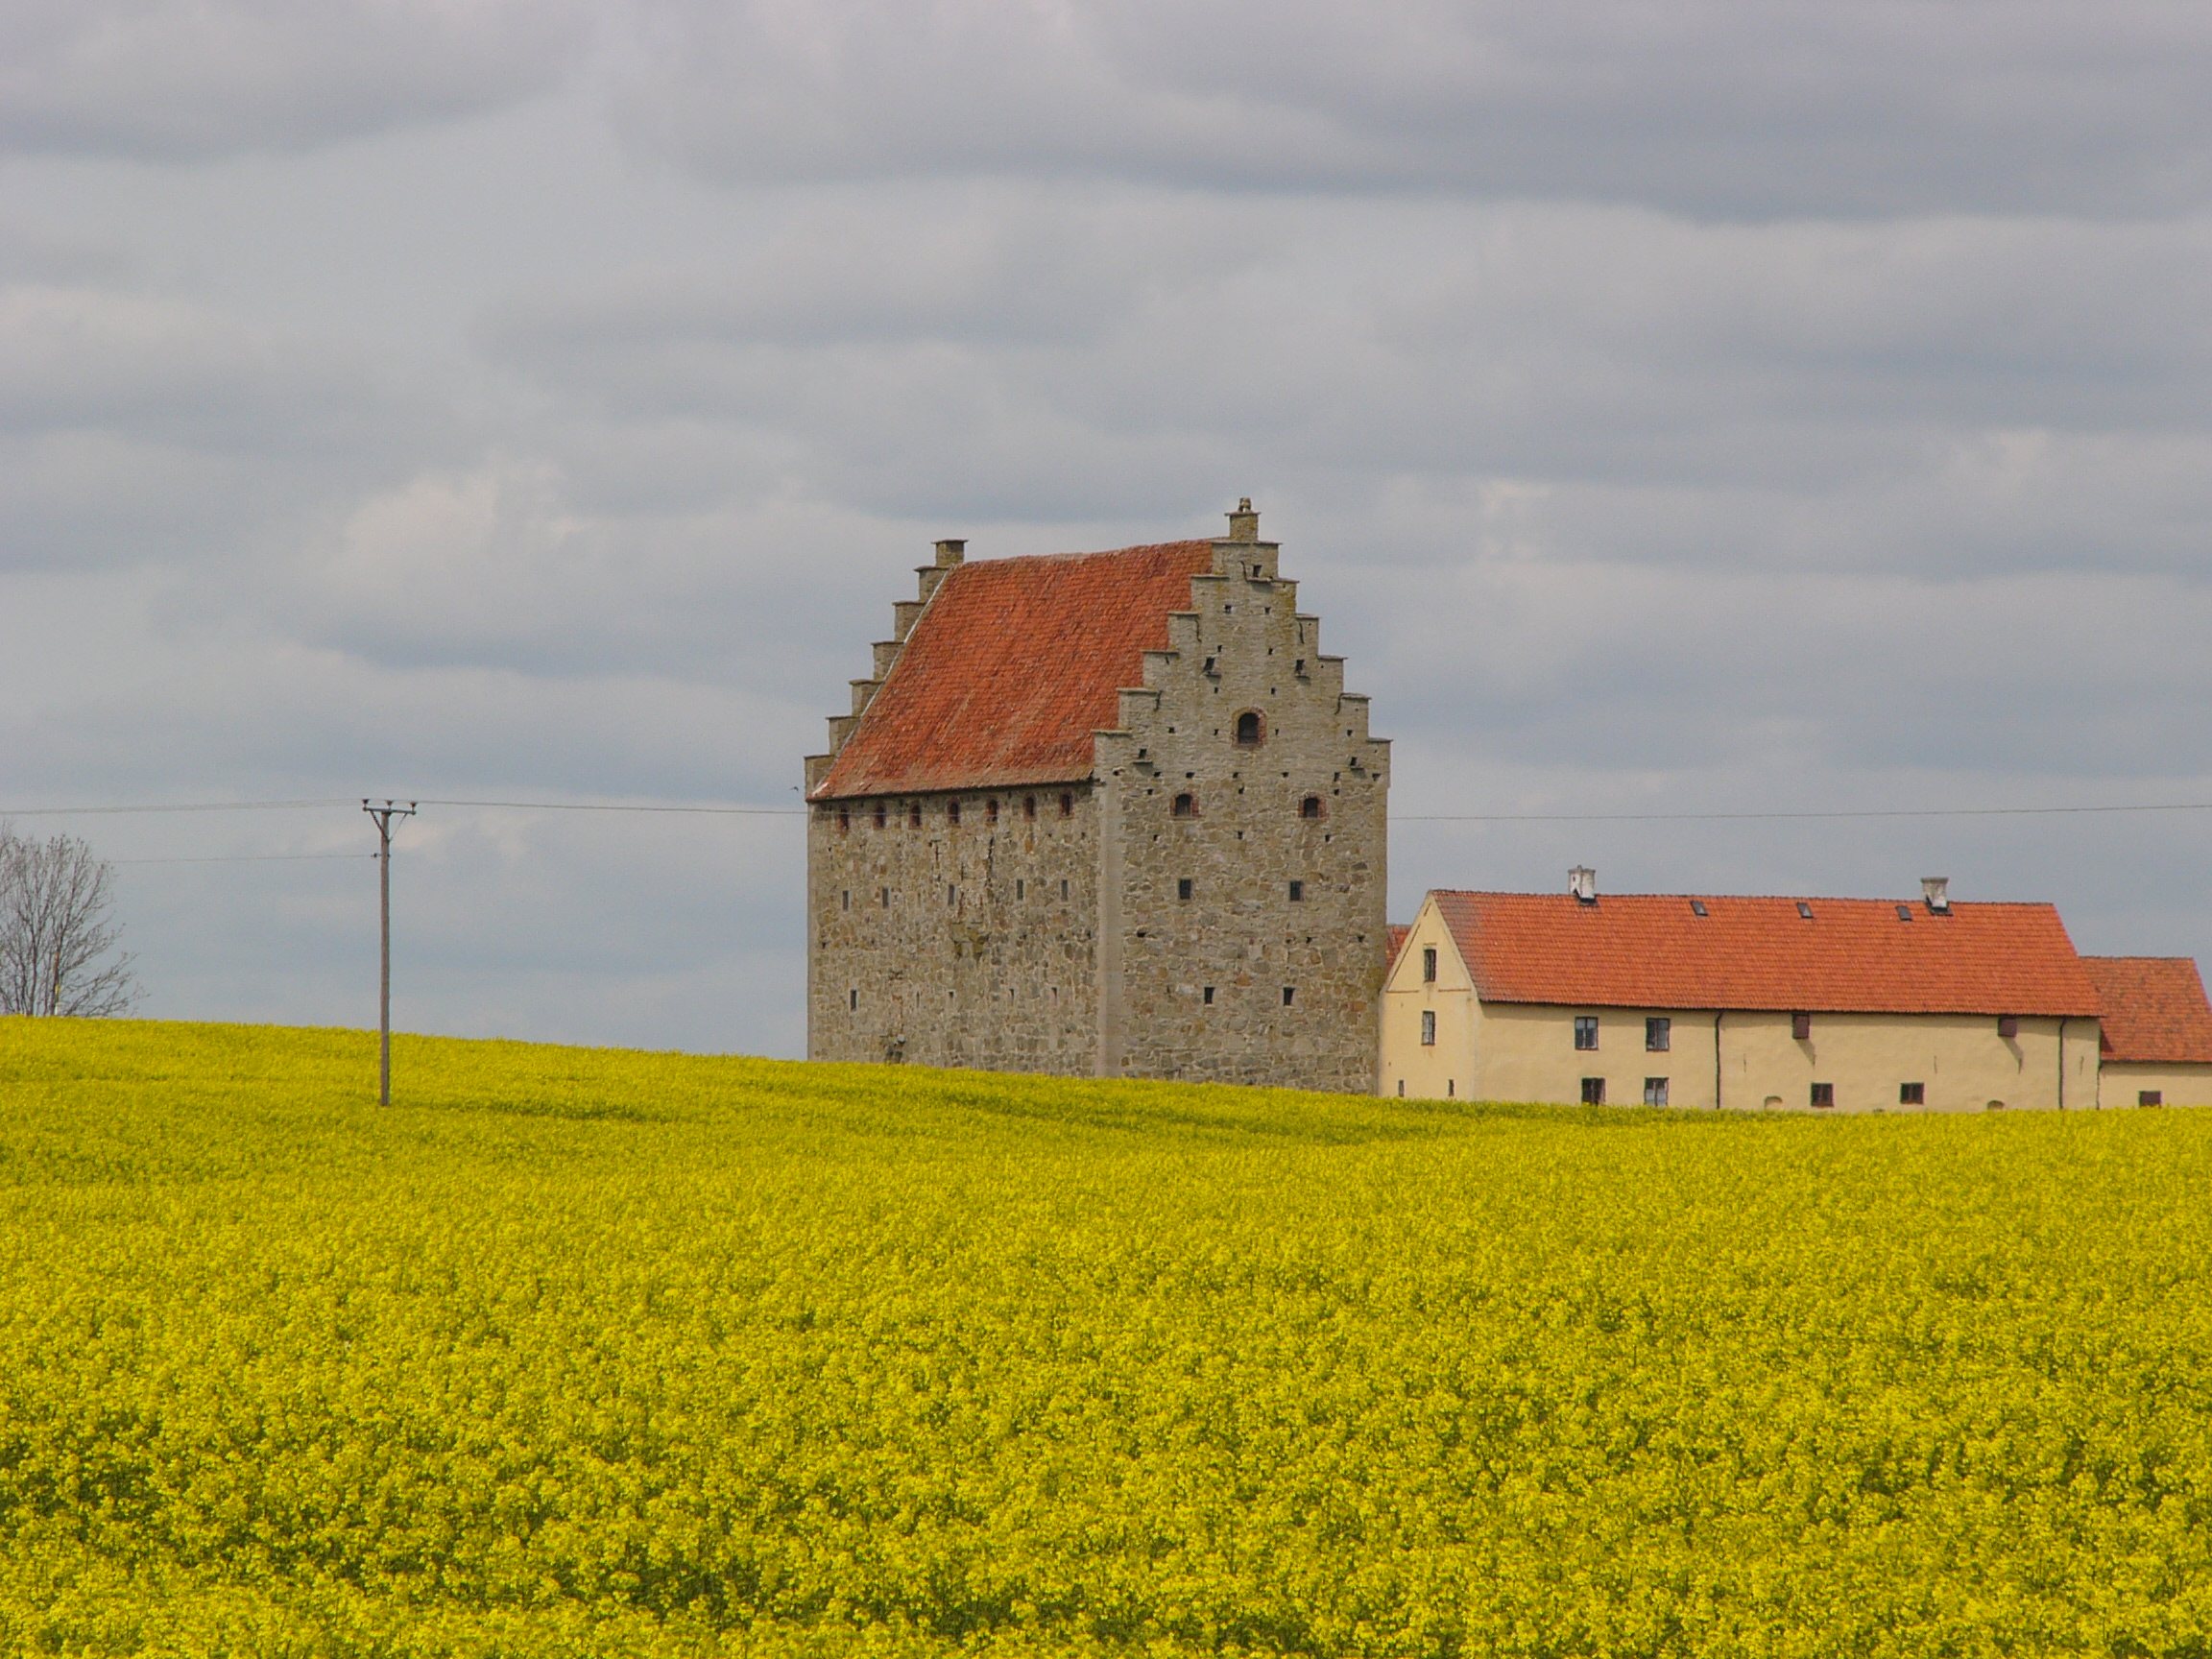 The castle and one of the lhouses can be seen in the distance from a rape field. Both buildings have red roof tiles. The castle has gray stone walls and the house has peach-colored lime plaster. The sky is slightly cloudy